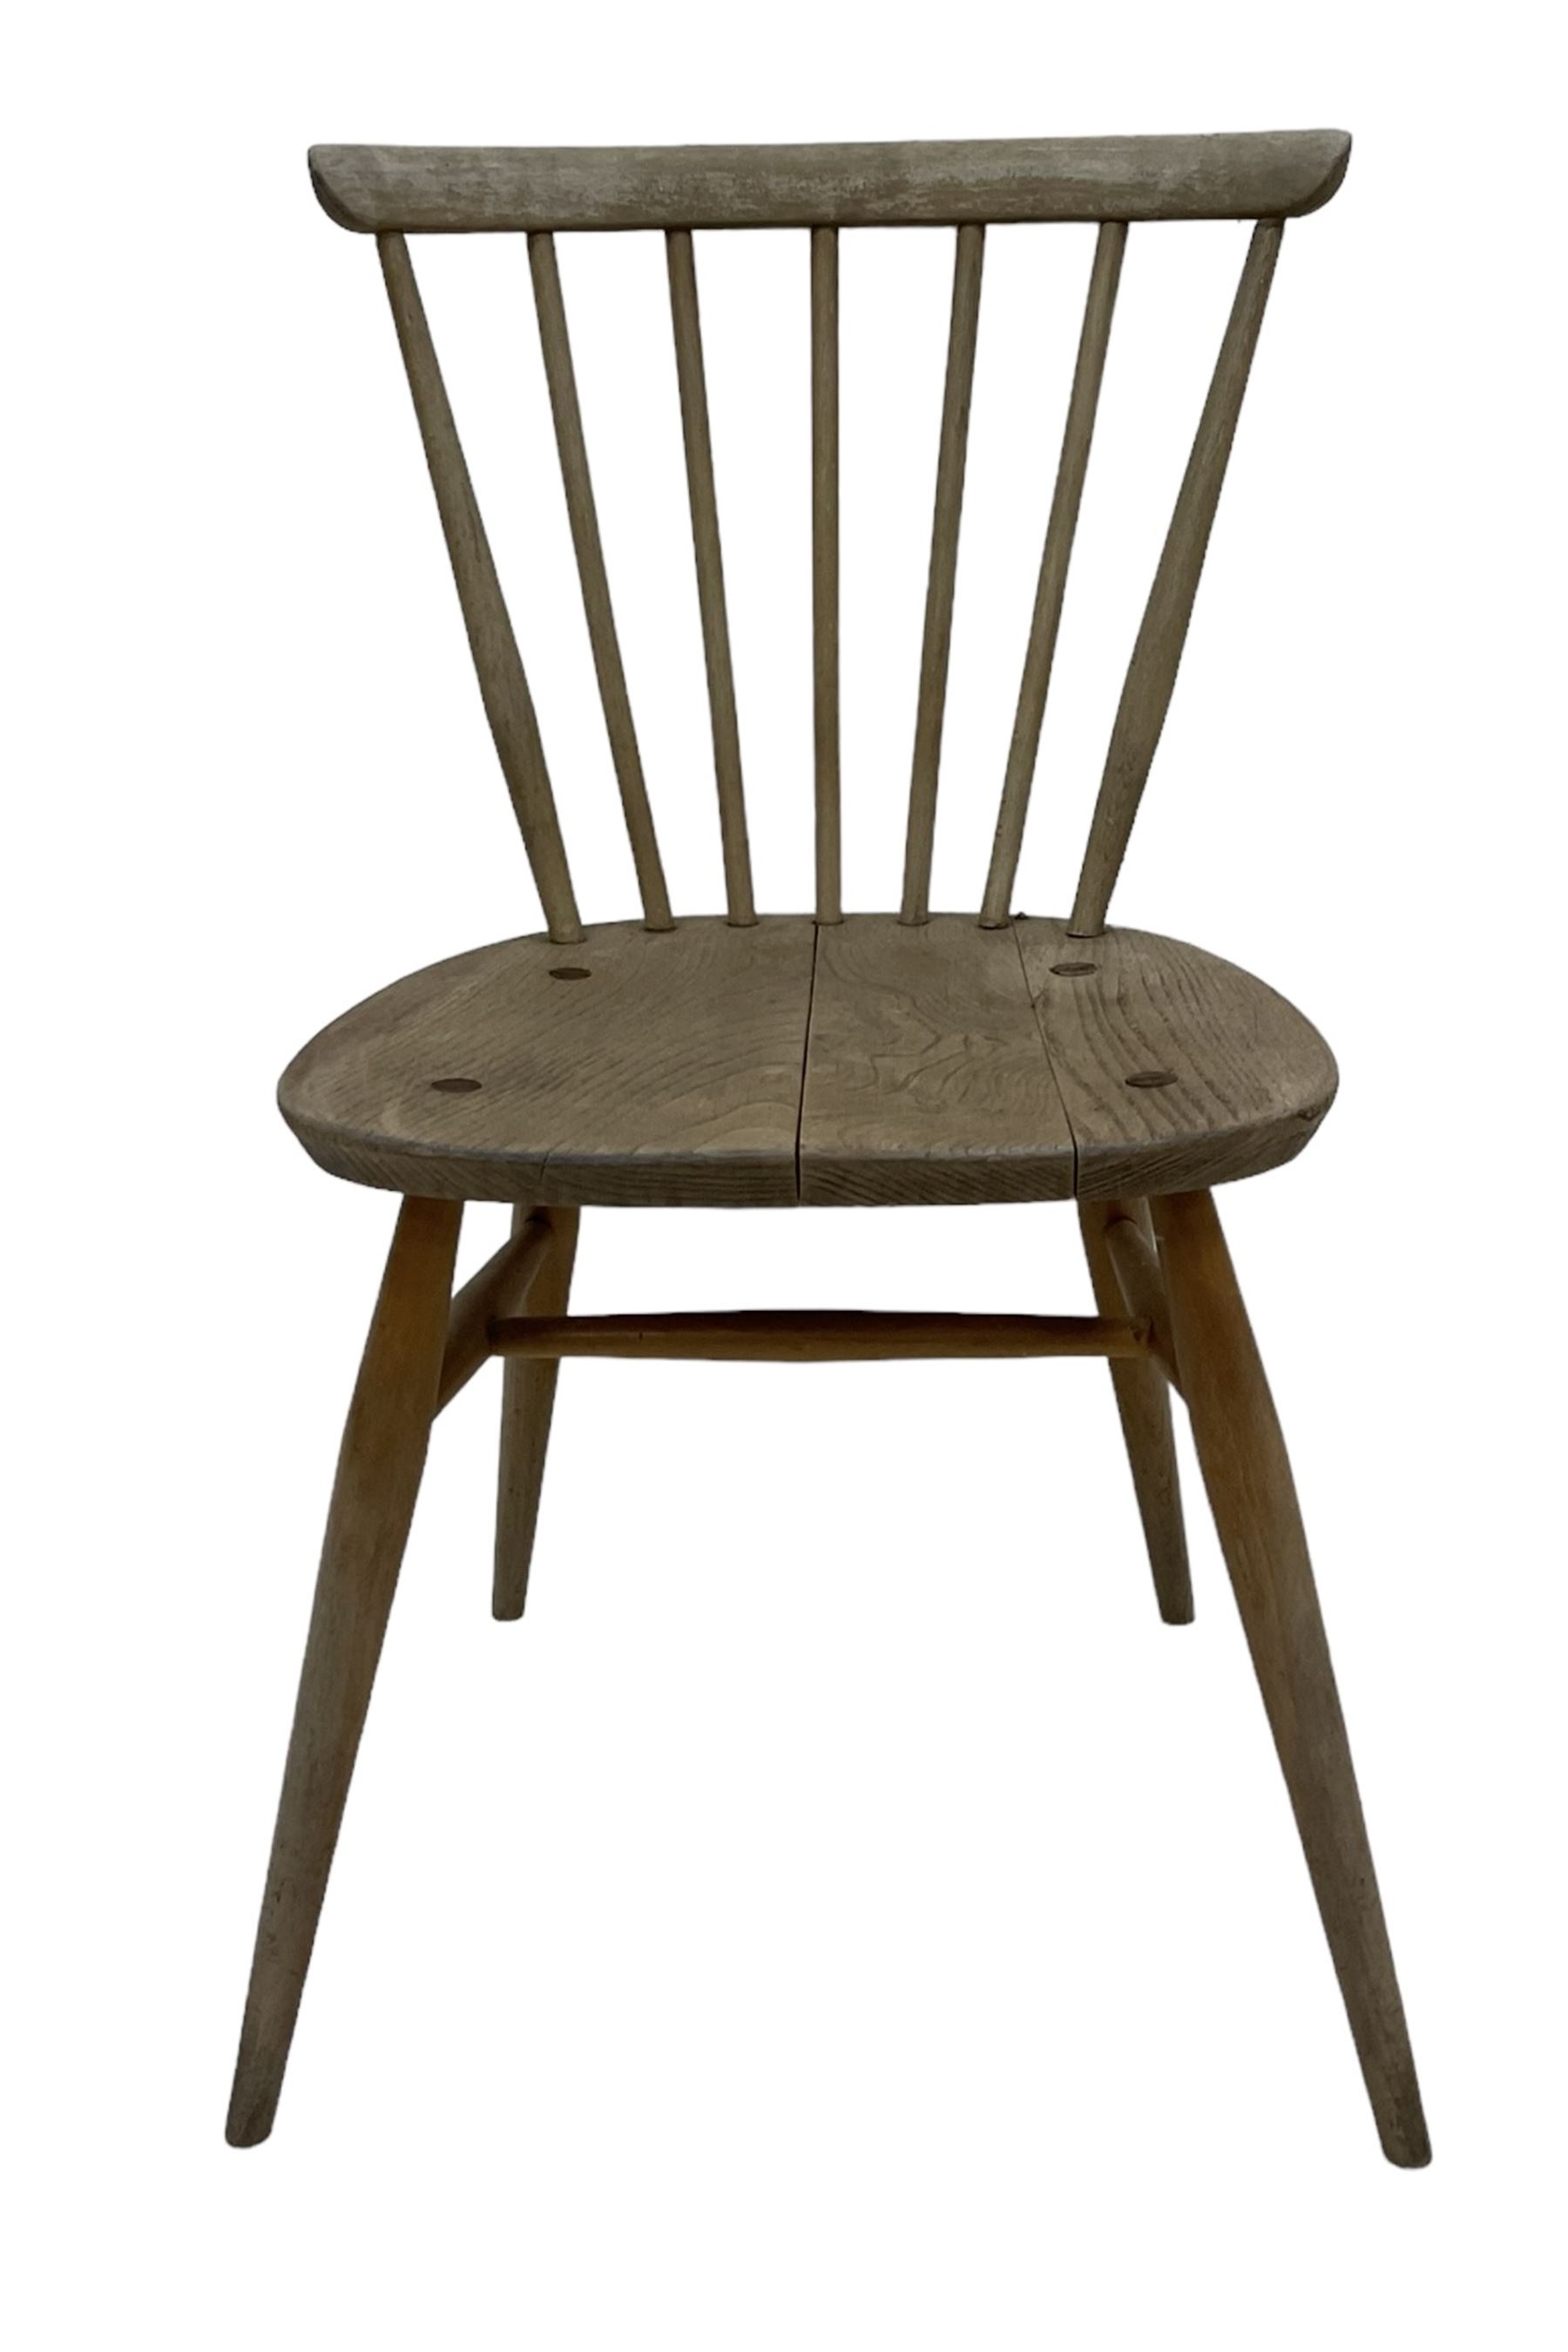 Ercol - 1960s set of three elm stick back chairs - Image 8 of 9